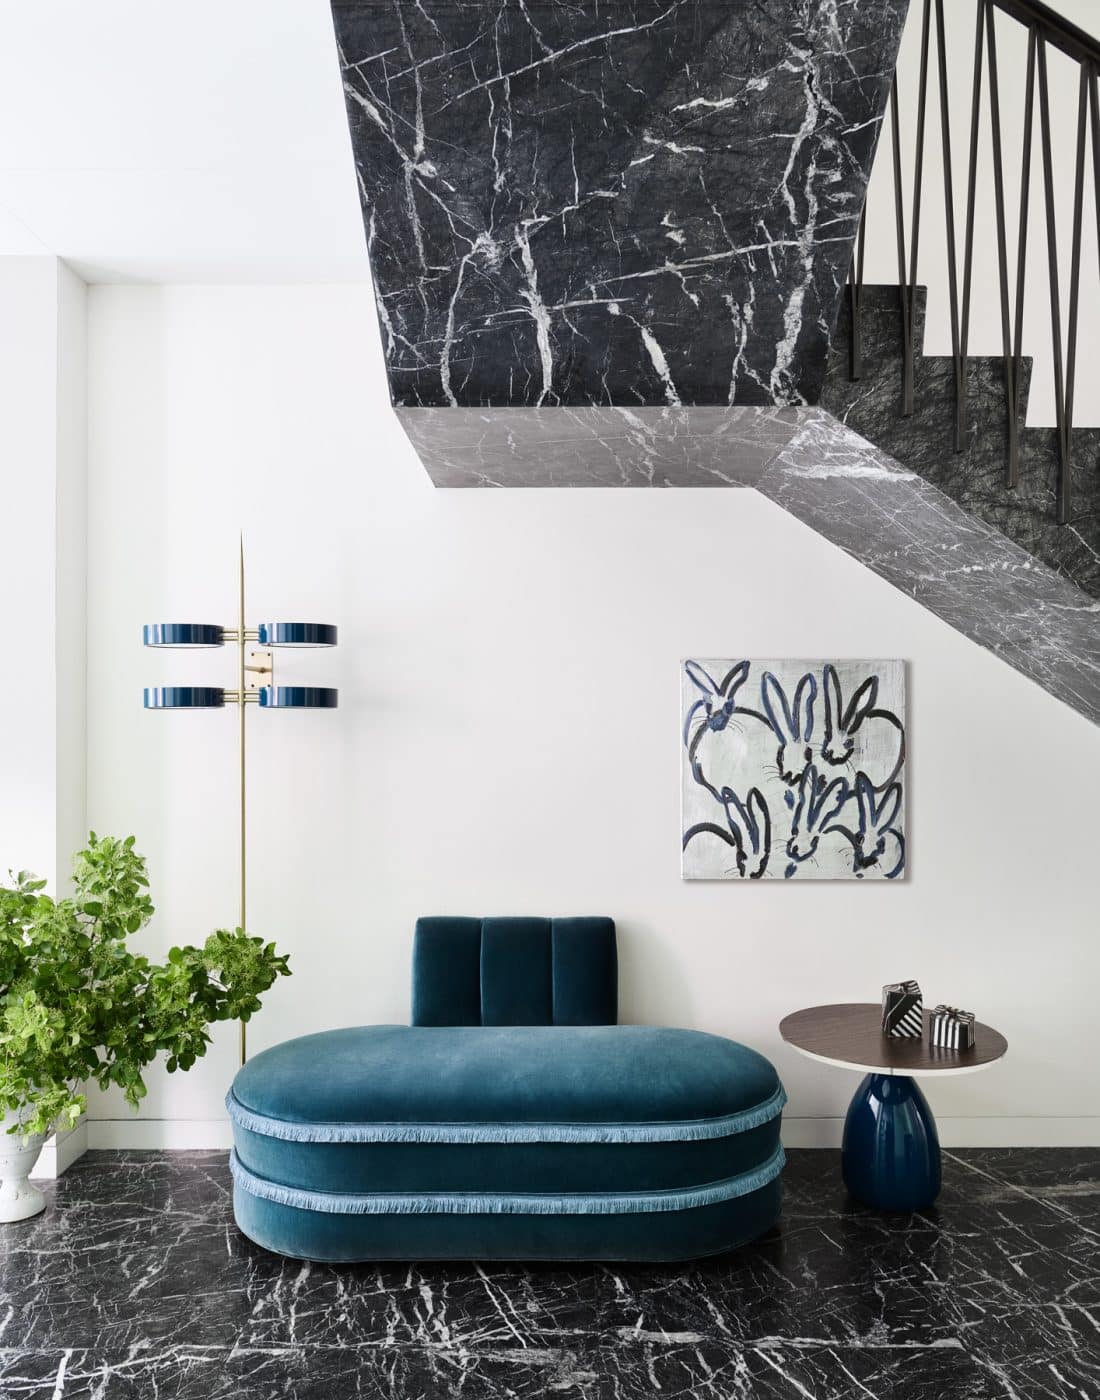 Entyway in maisonette project in New York City's West Village by interior designer Daun Curry